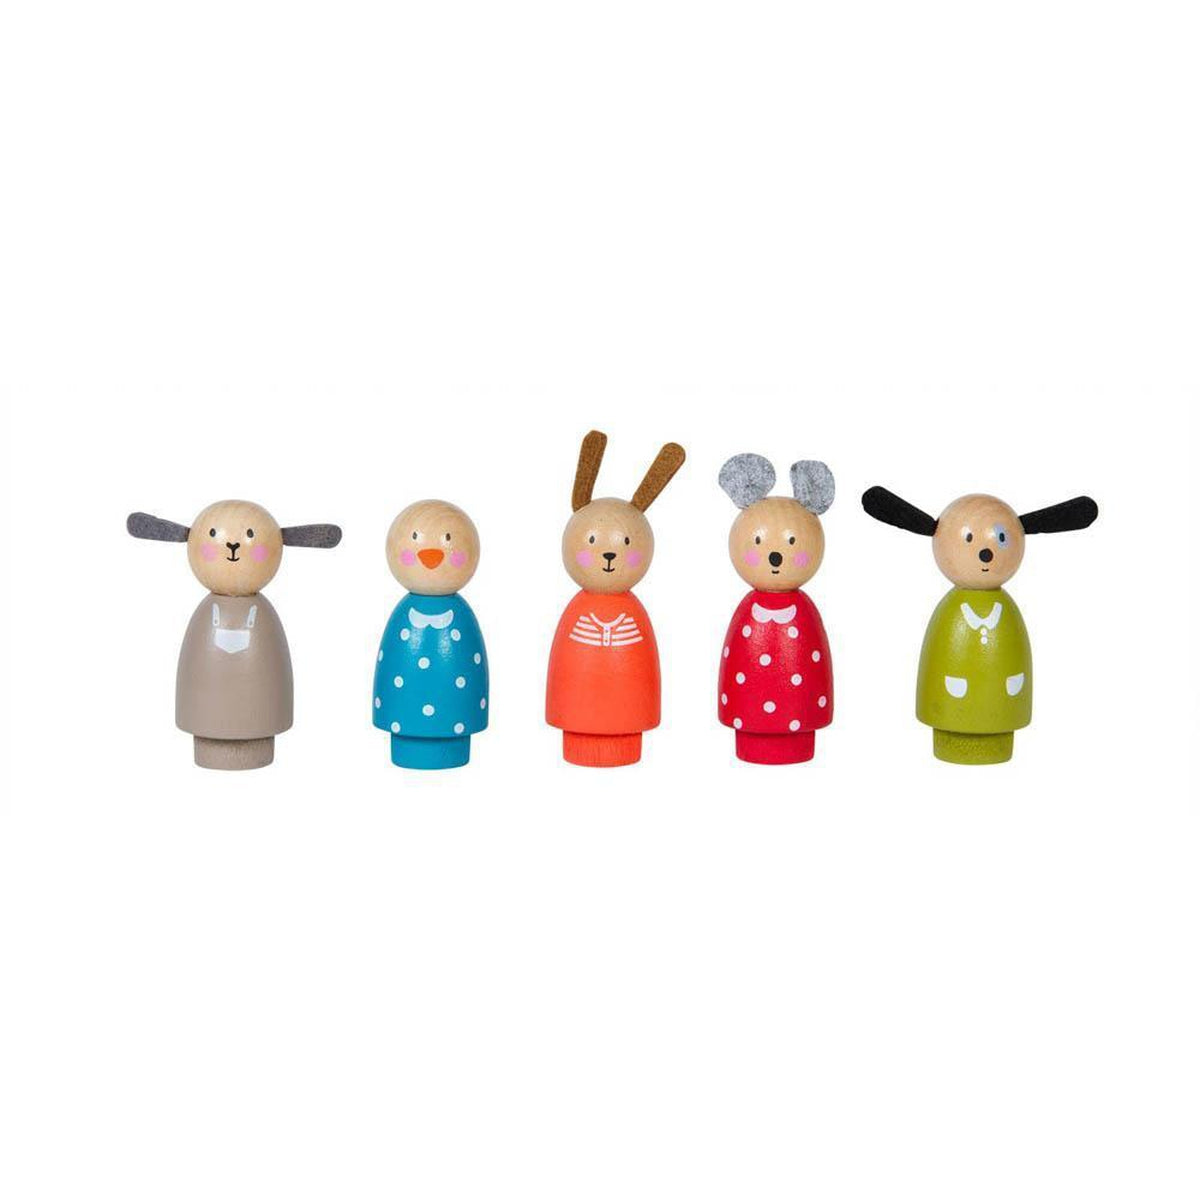 Moulin Roty grande famille wood characters set-people, animals & lands-Fire the Imagination-Dilly Dally Kids